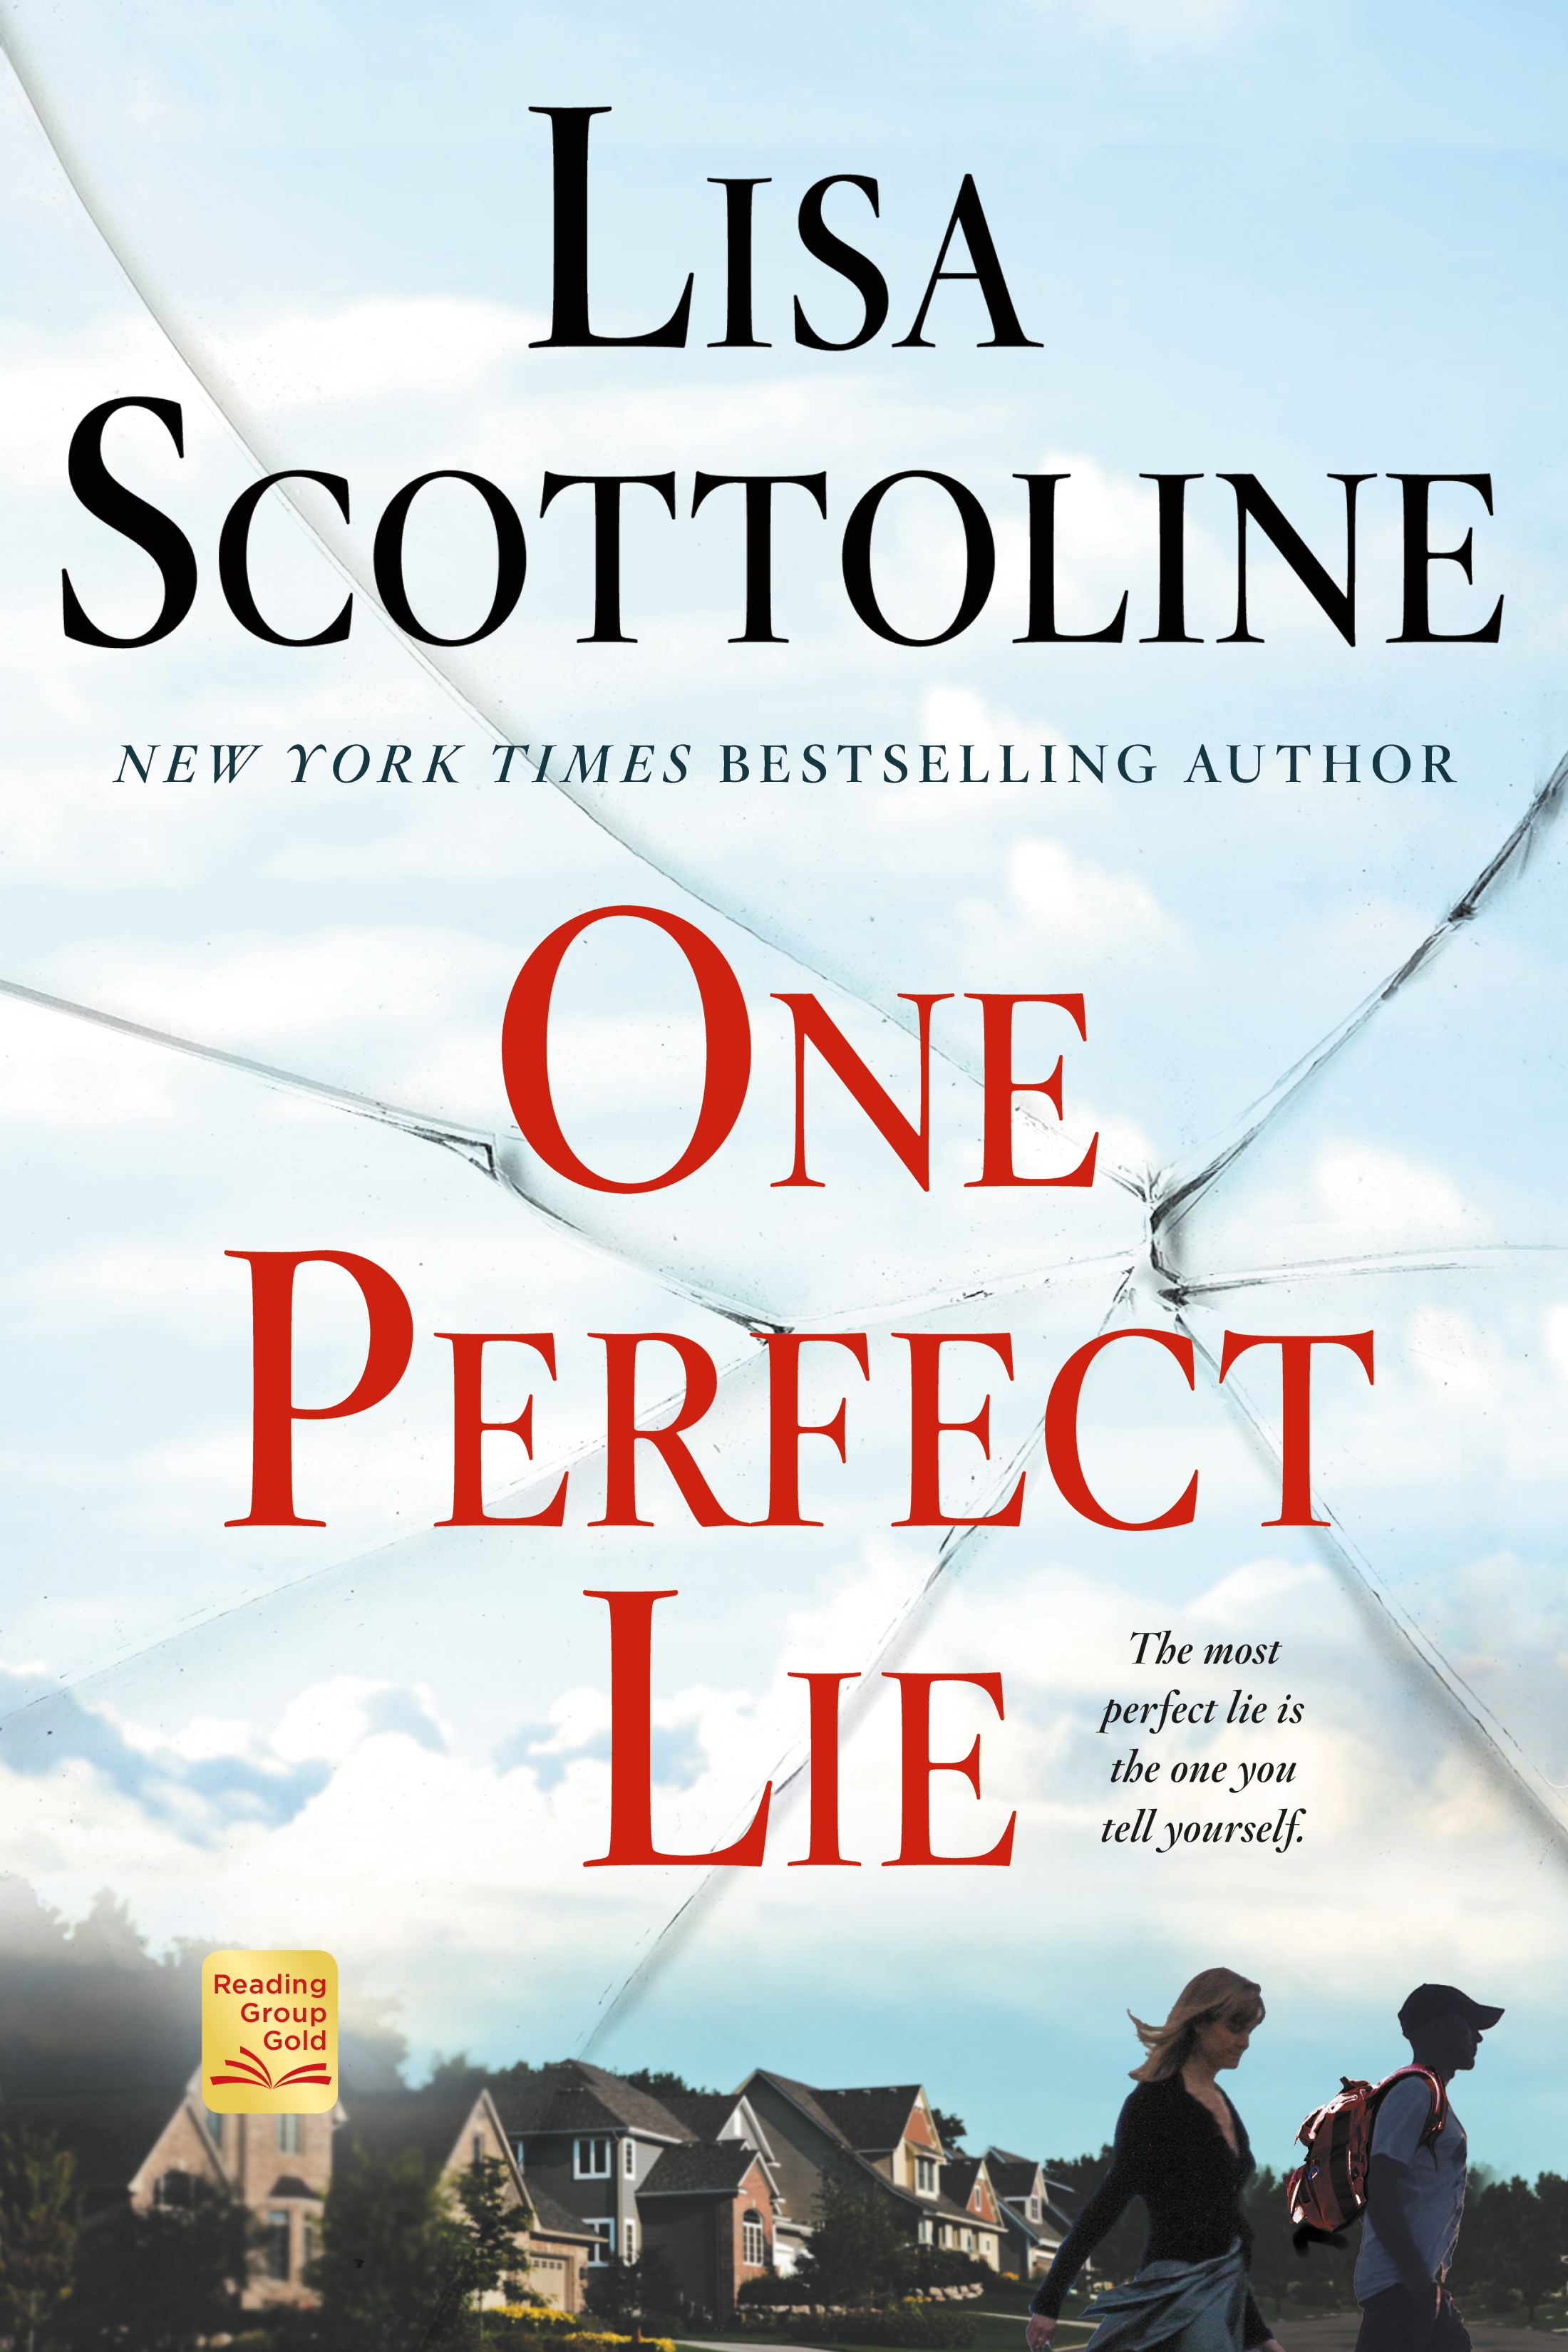 Book “One Perfect Lie” by Lisa Scottoline — February 27, 2018